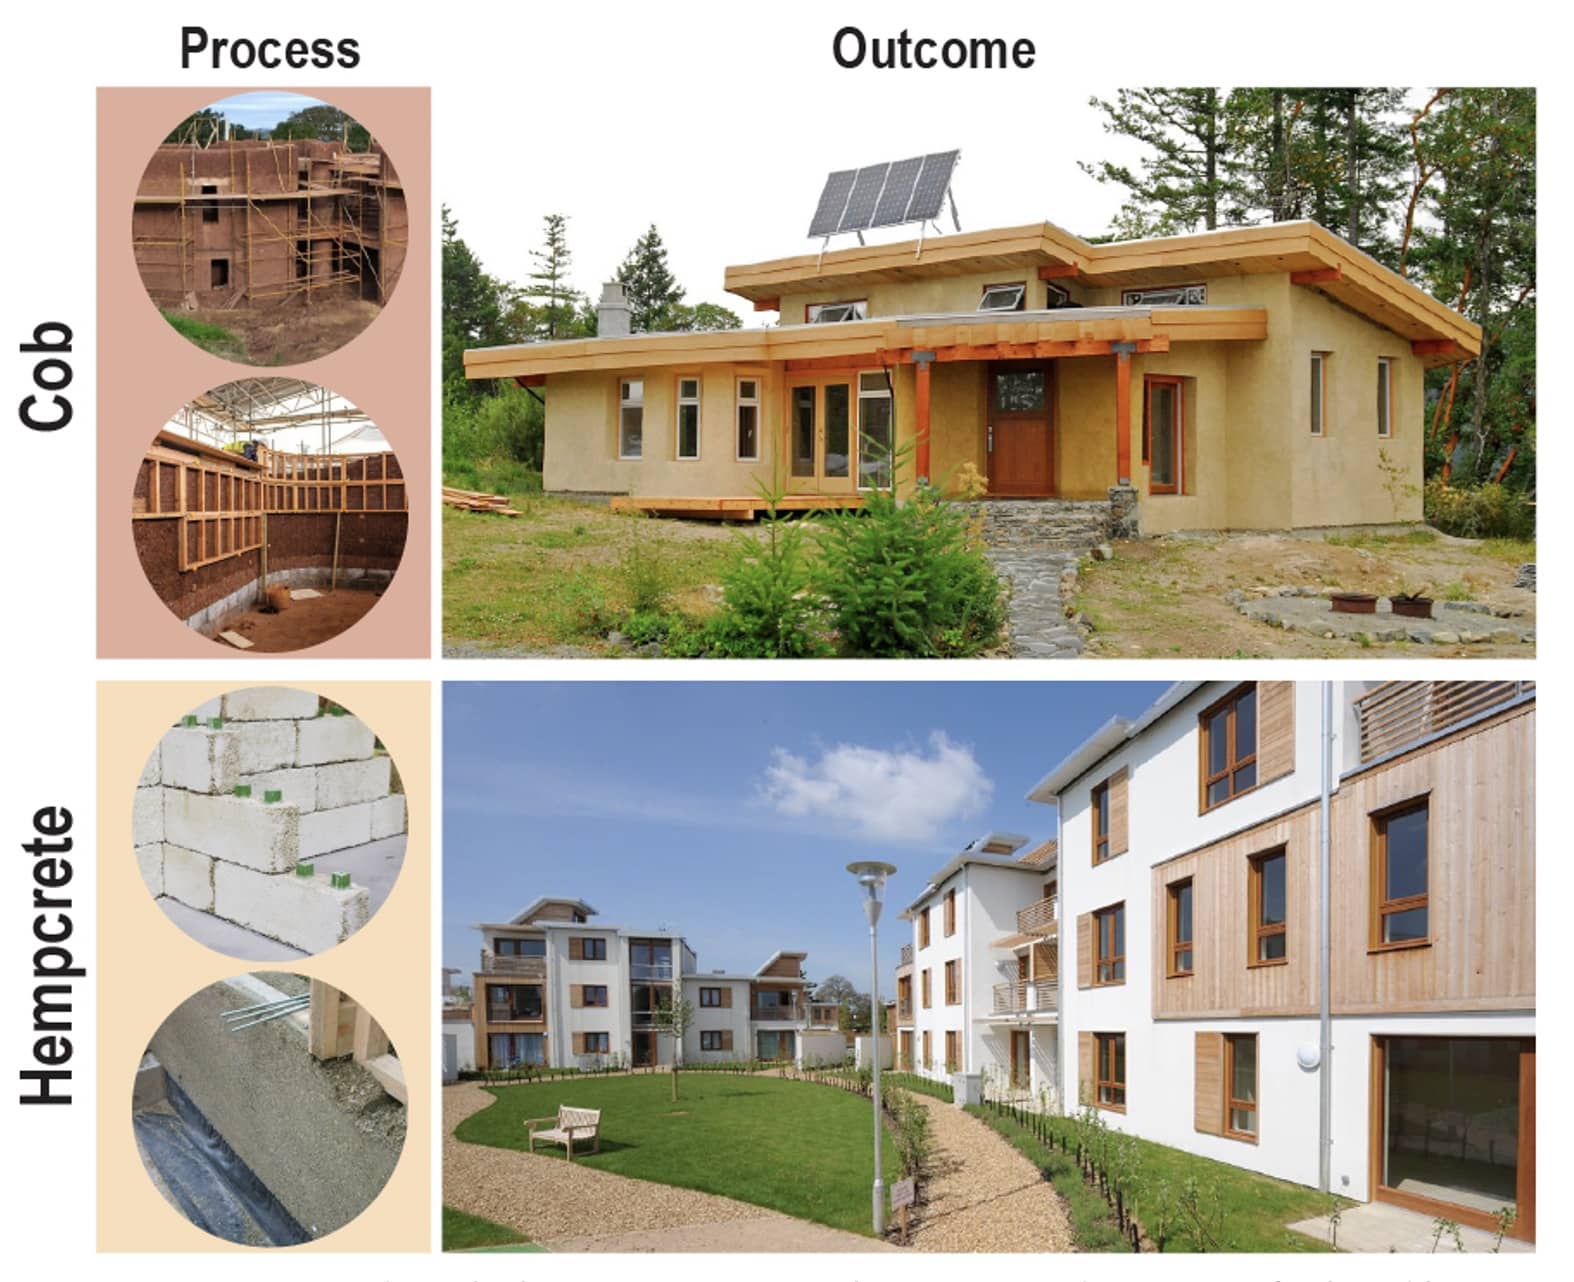 <strong>Figure 2</strong>. <em>Structures made with alternative concrete: the process and outcome of cob and hempcrete construction</em>.